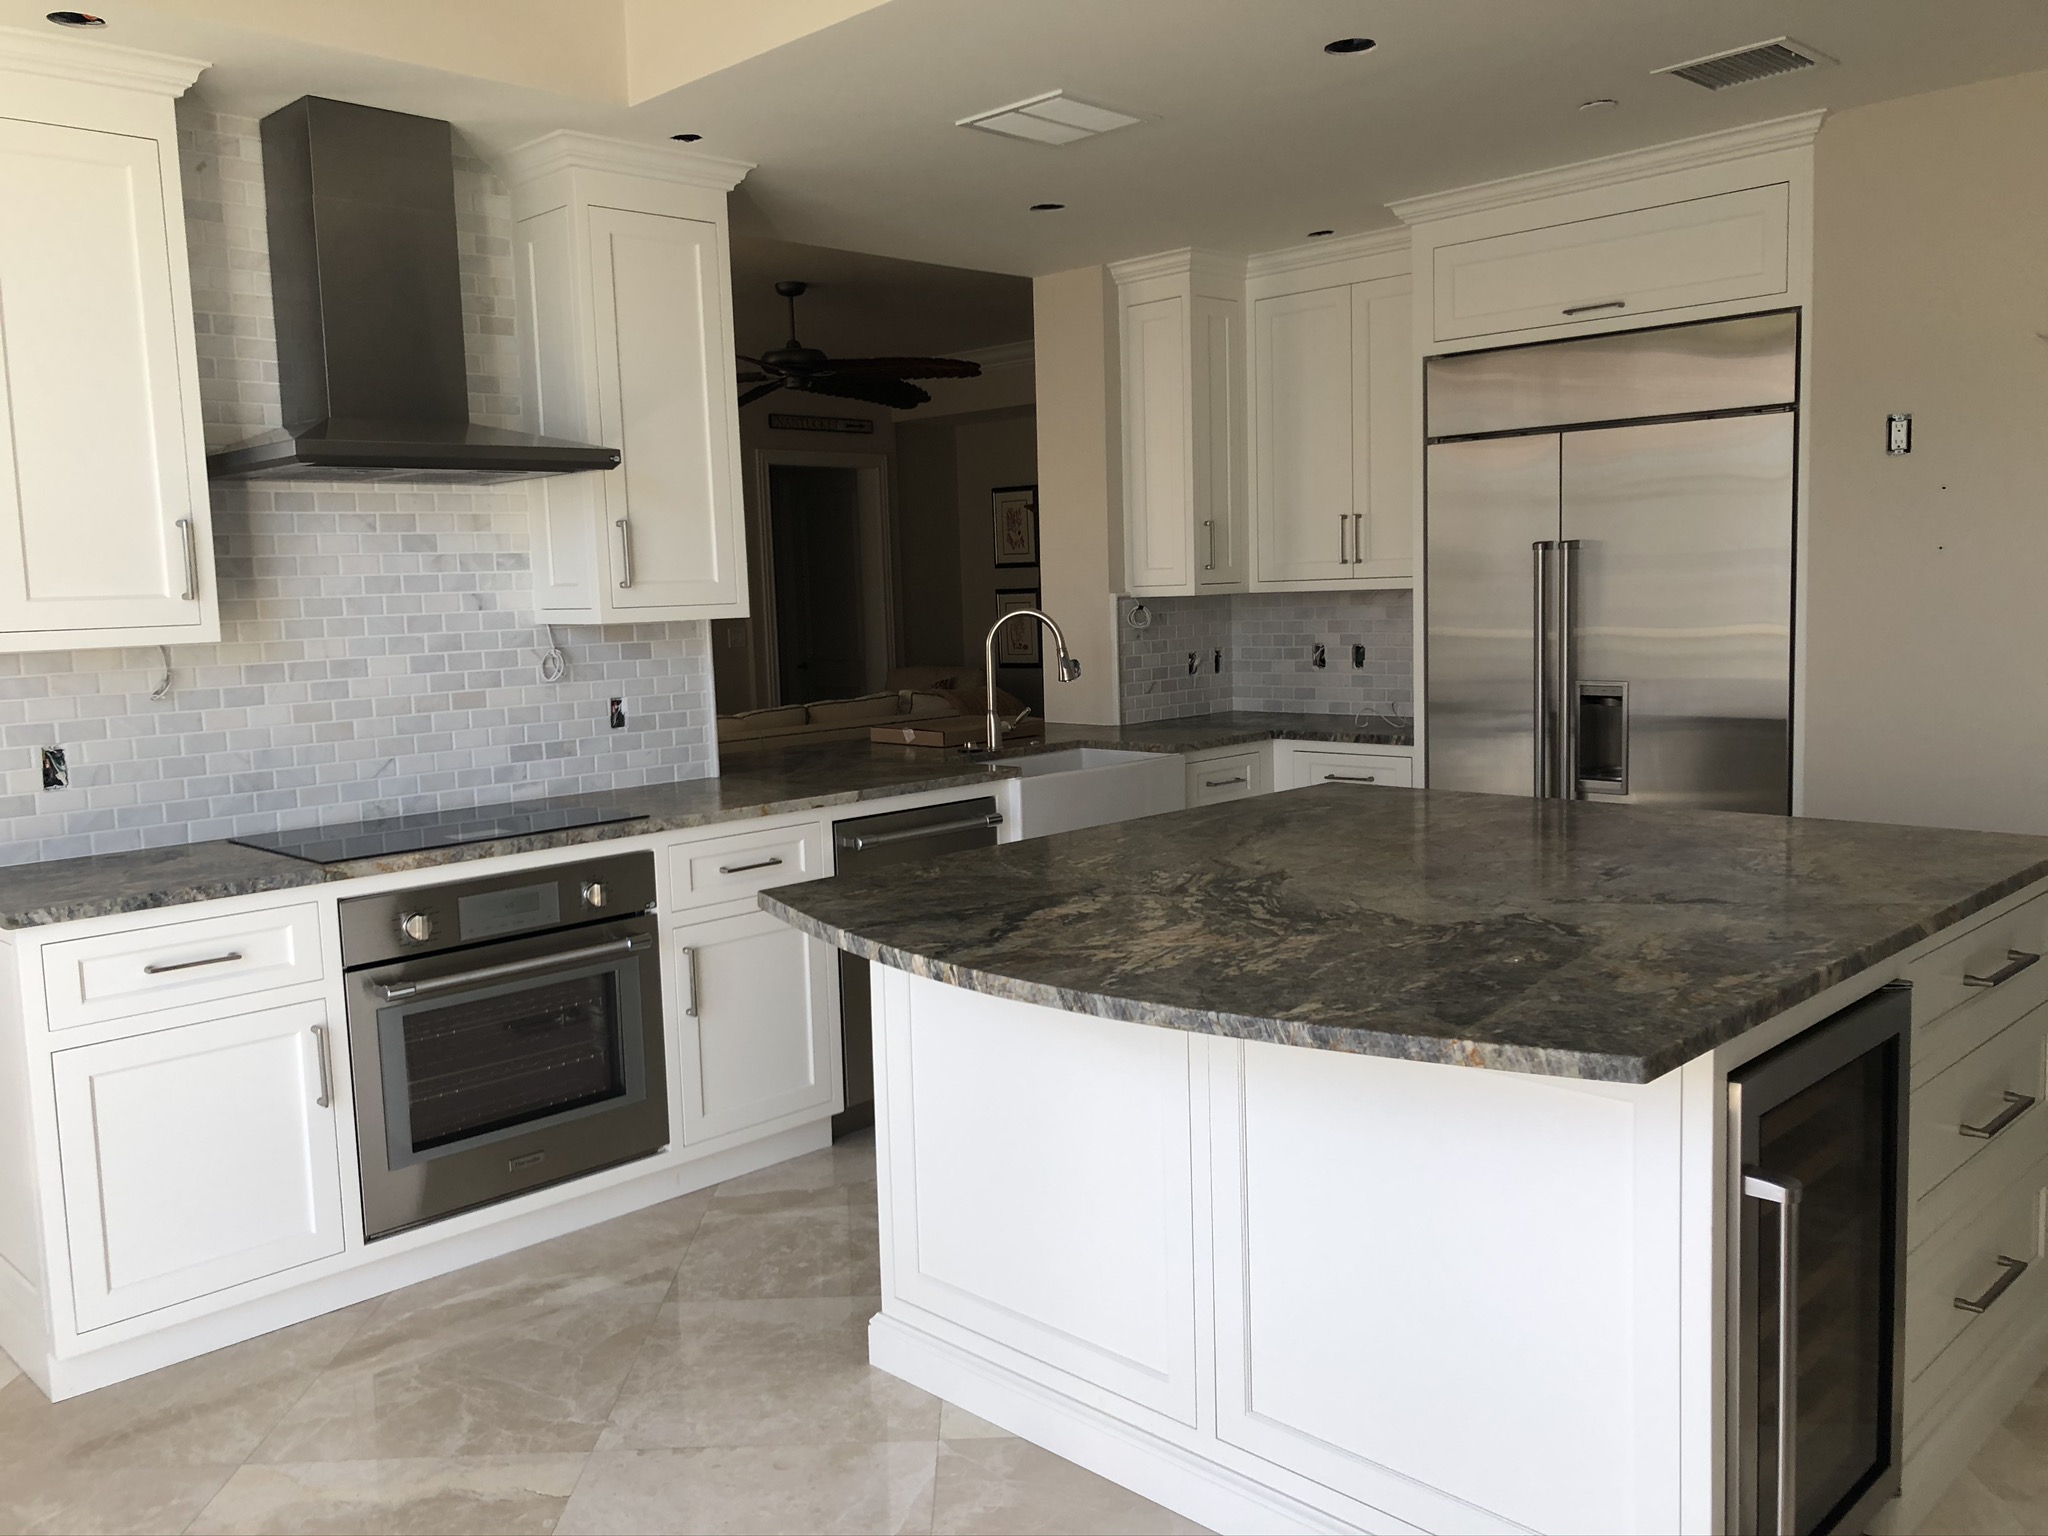 William Charles in Vero Beach, FL redesigned this kitchen with new custom cabinetry, backsplash and state of the are appliances.